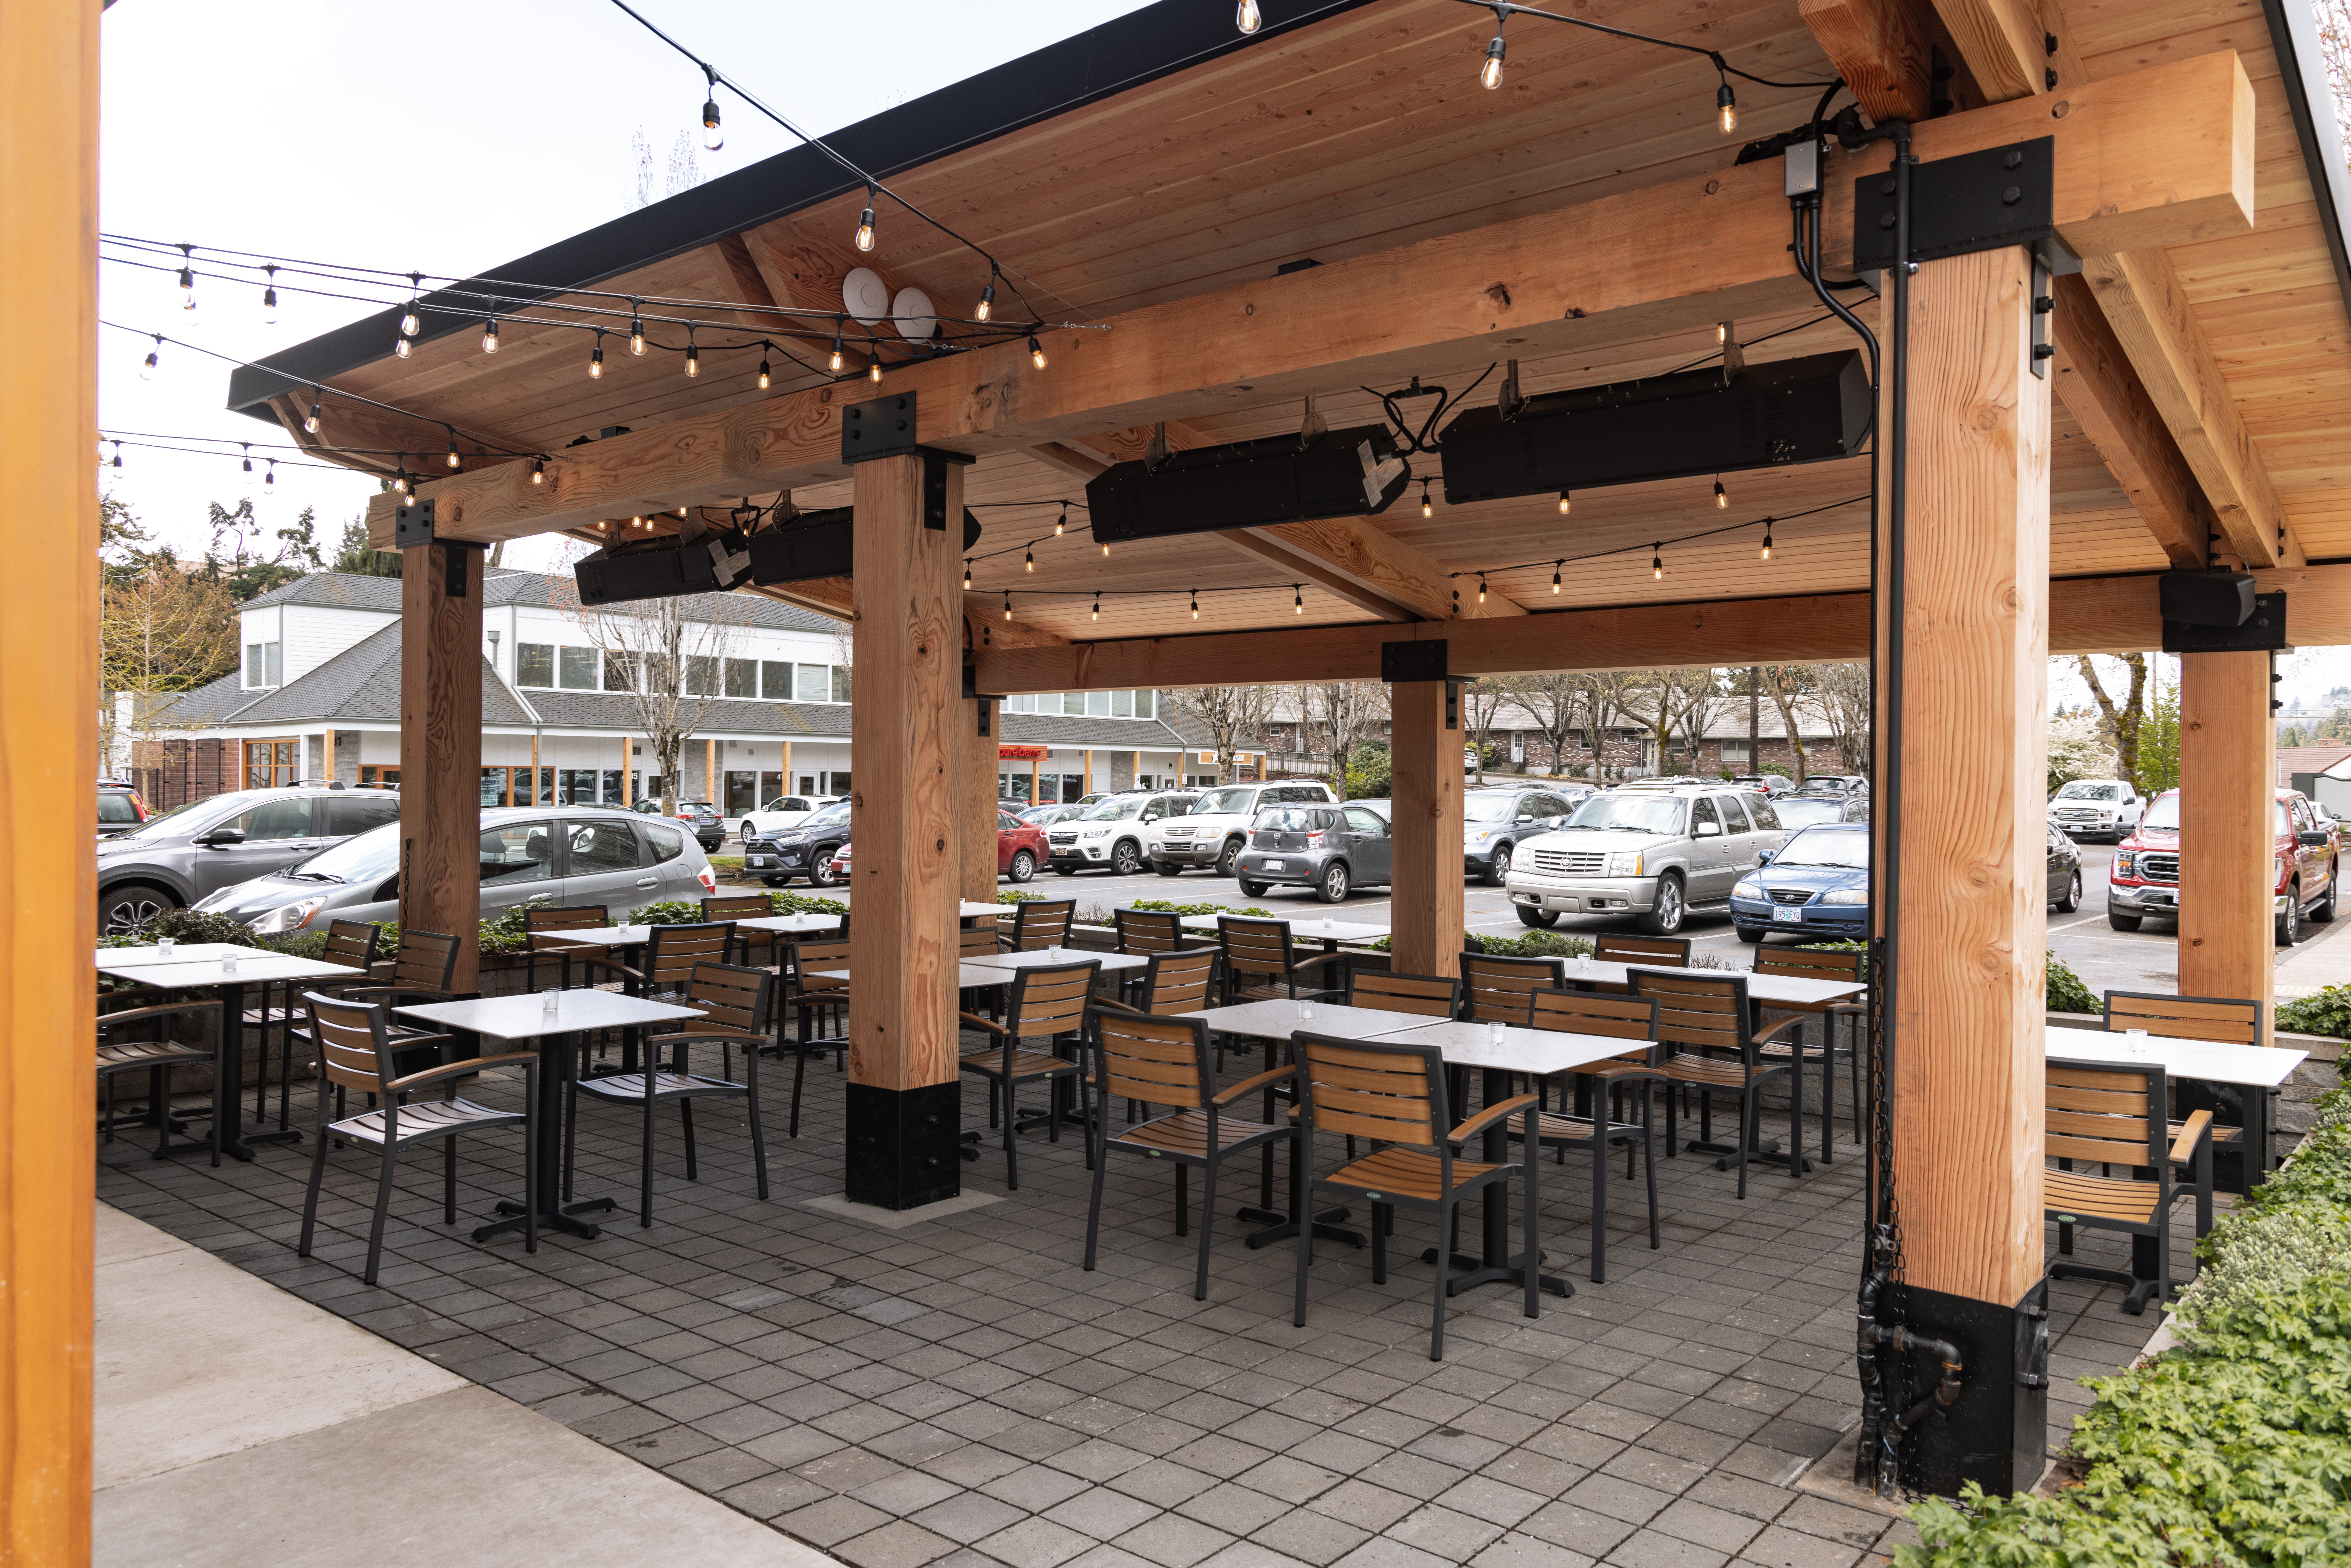 Outdoor covered seating area